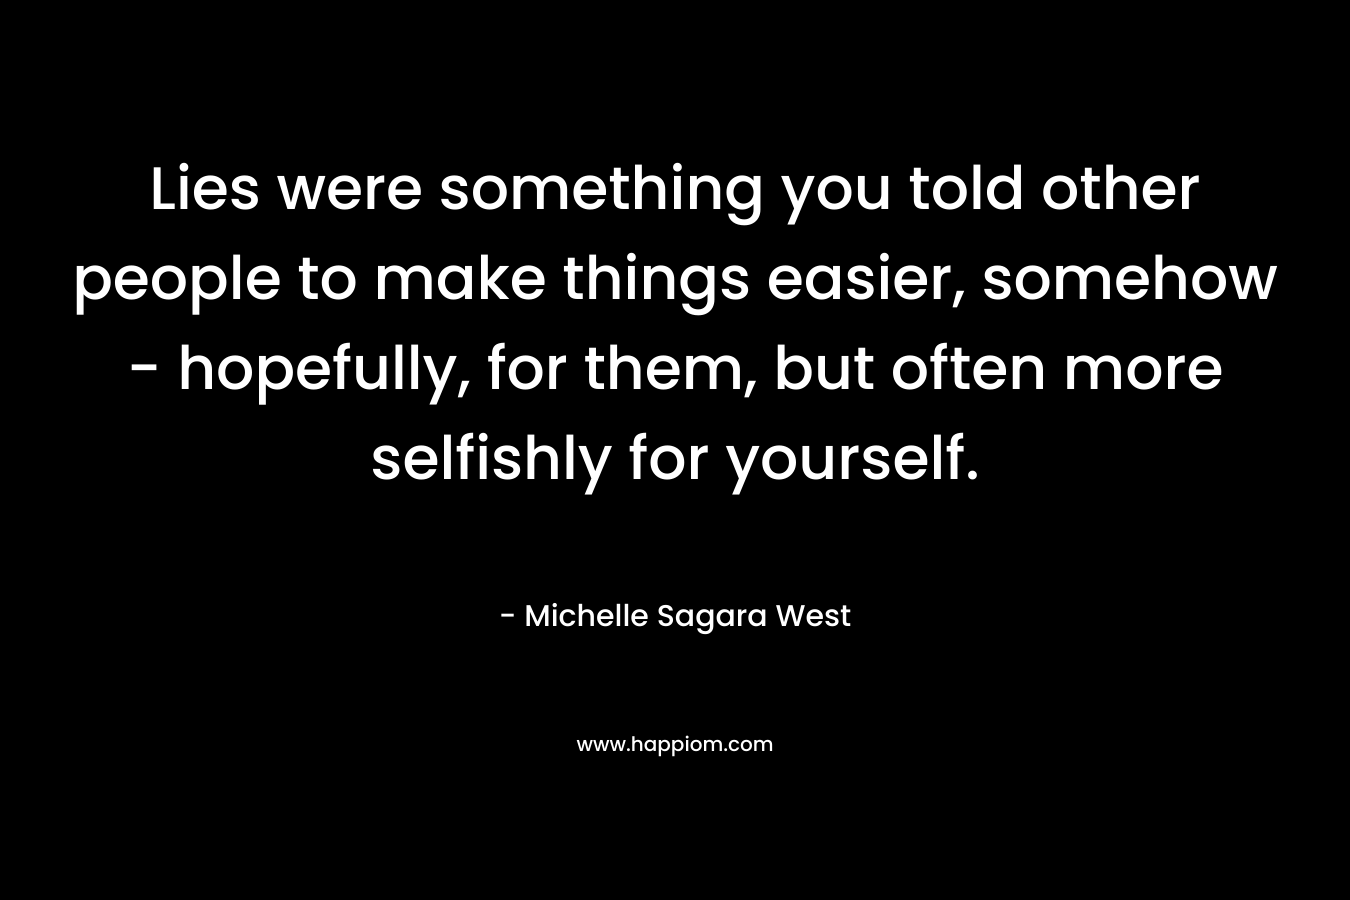 Lies were something you told other people to make things easier, somehow - hopefully, for them, but often more selfishly for yourself.